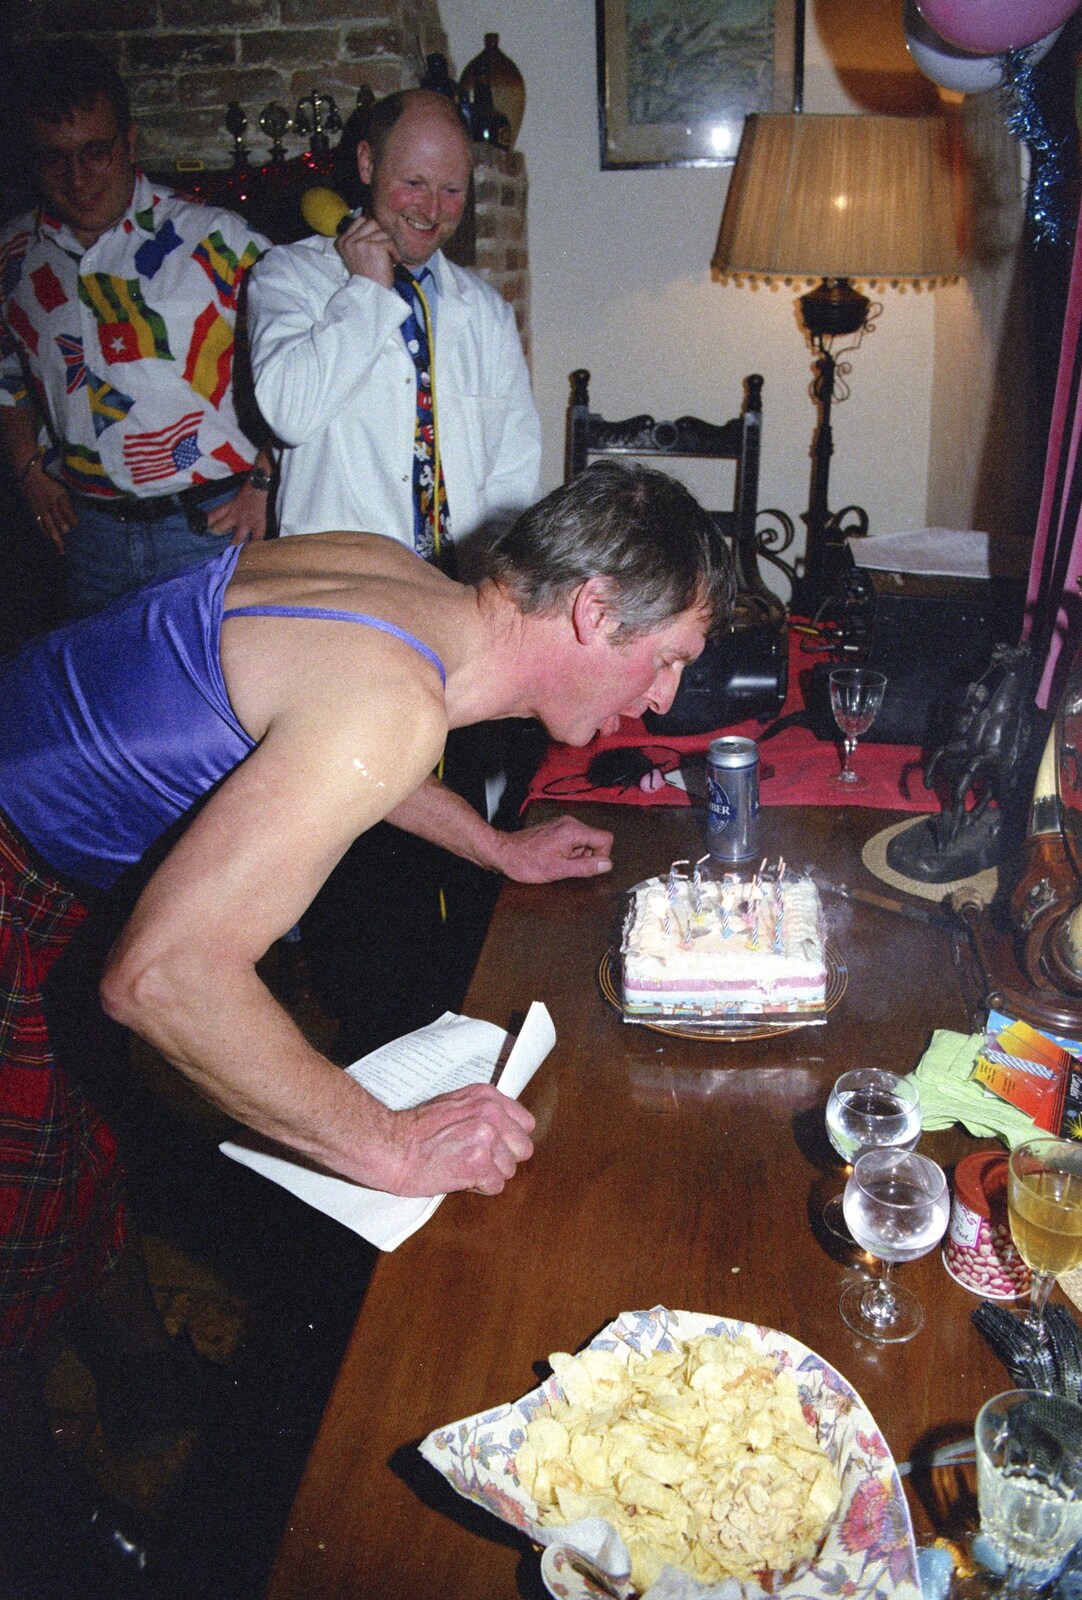 Geoff blows out the birthday candles from Geoff's Birthday, Stuston, Suffolk - 18th December 1995